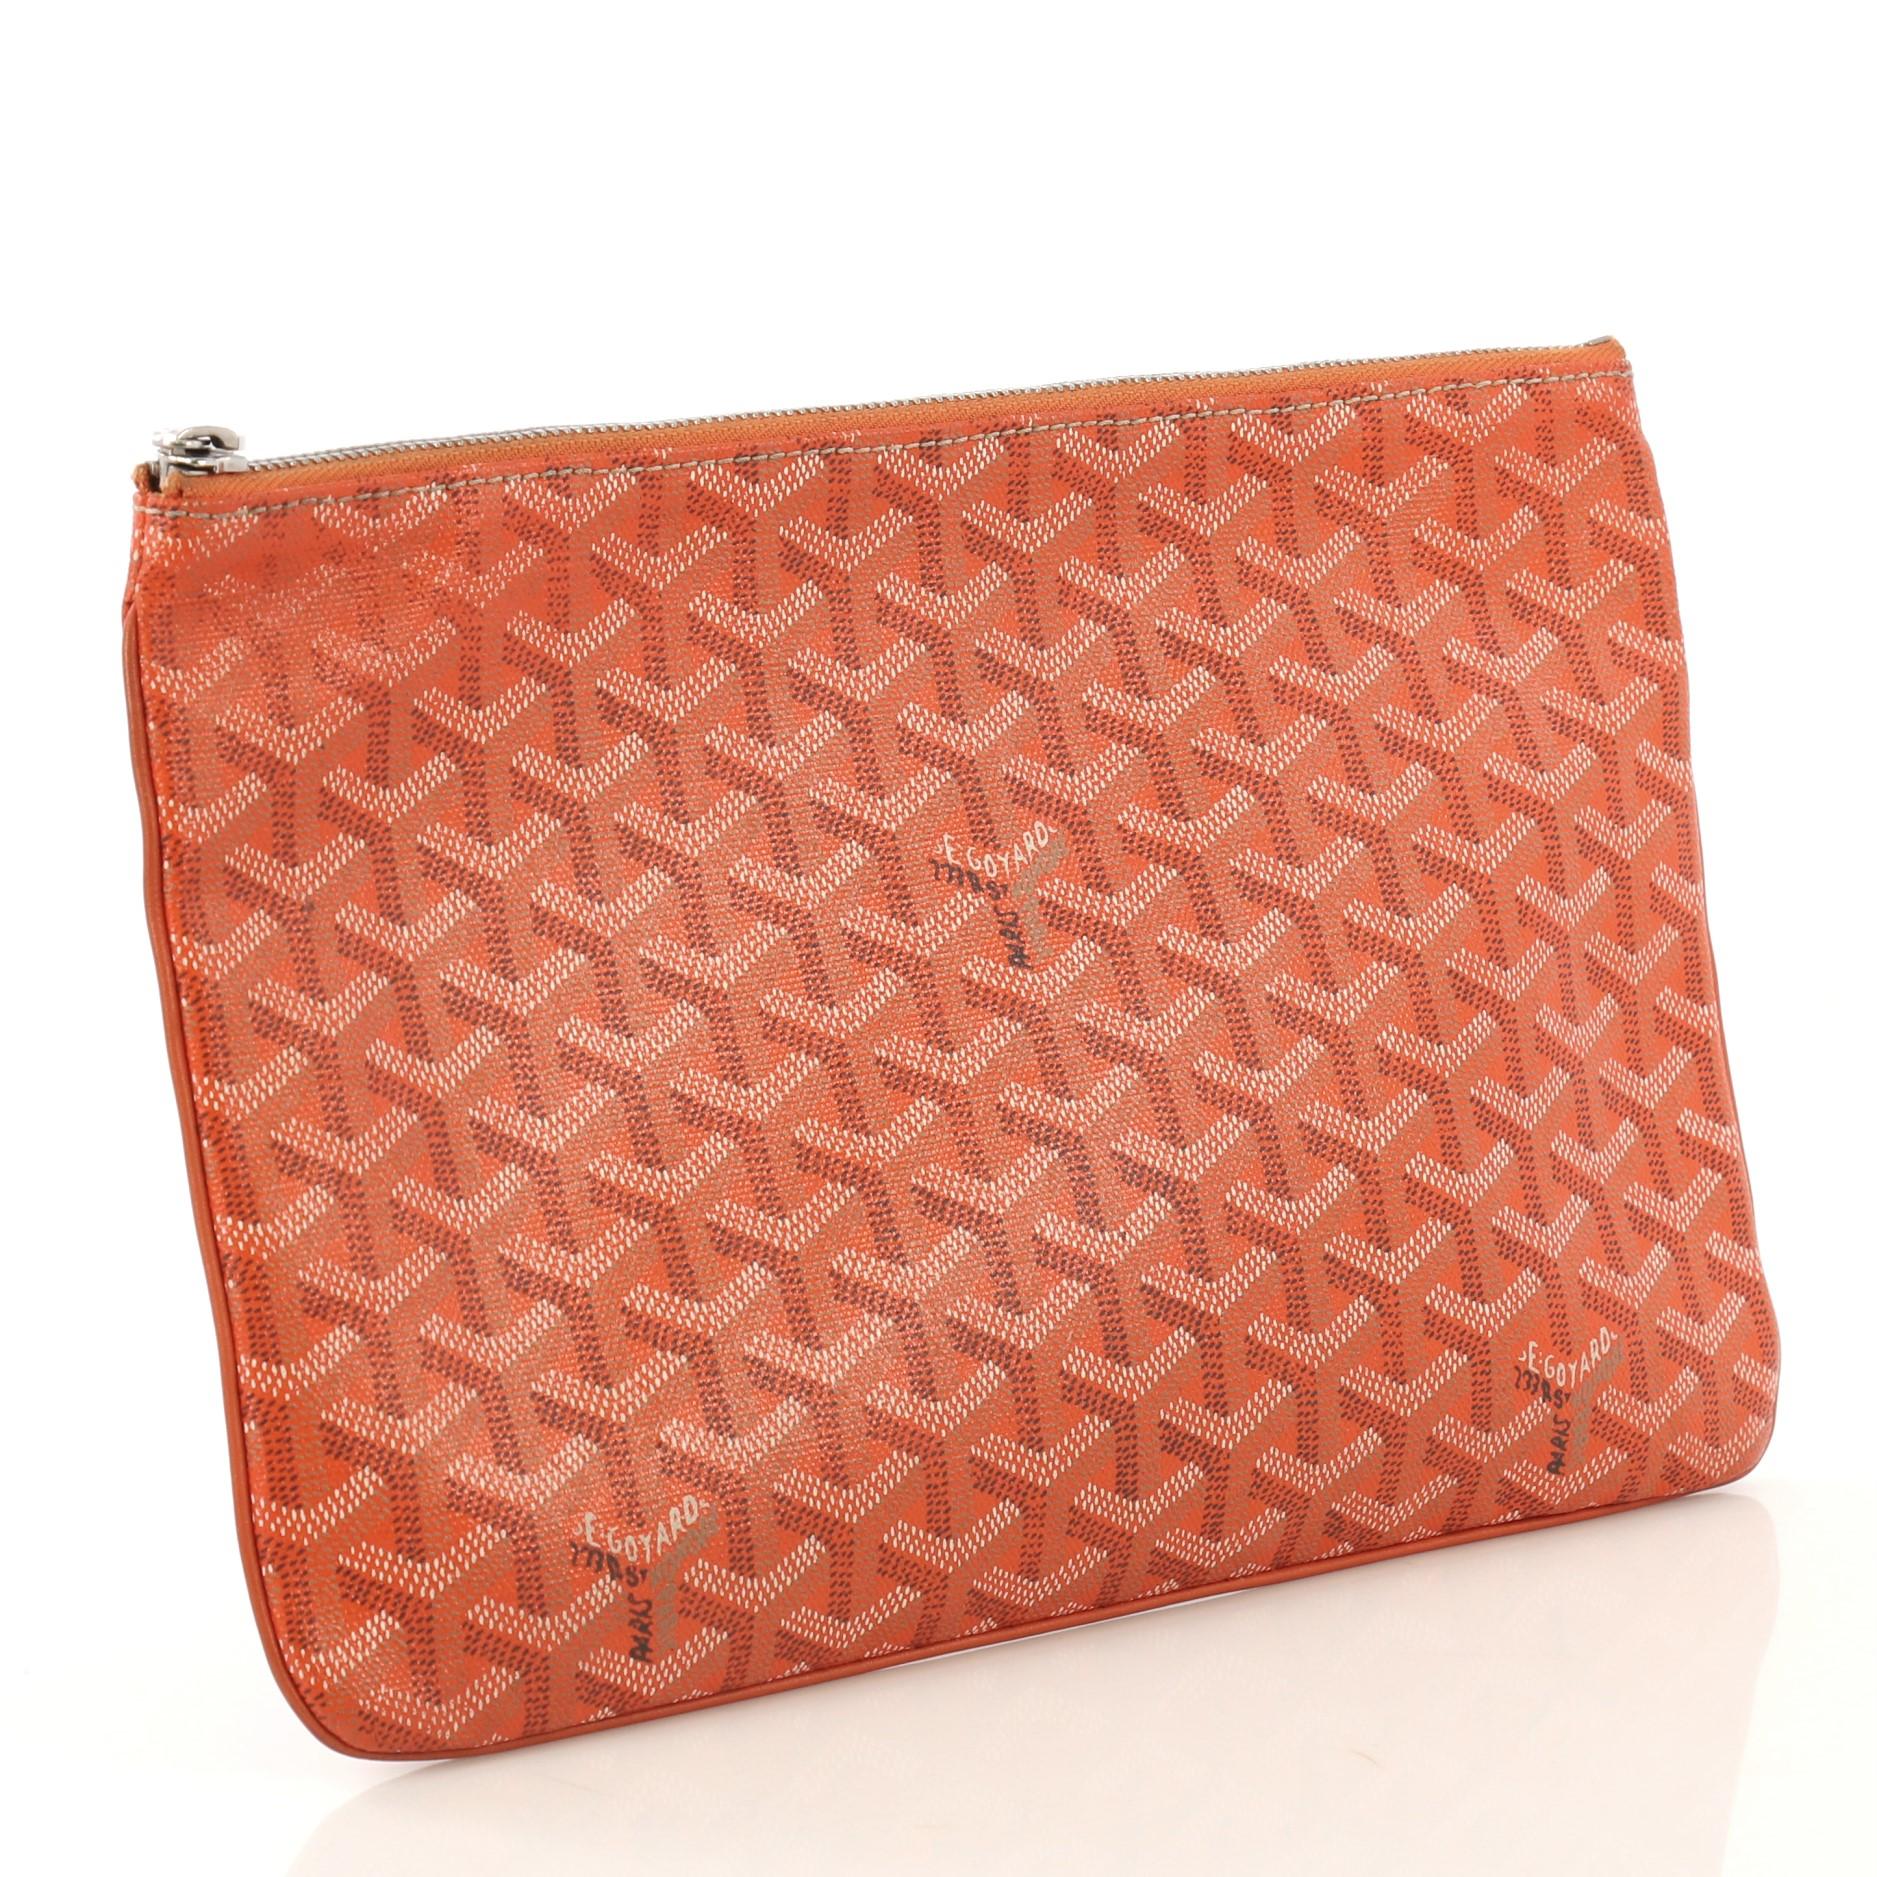 This Goyard Senat Zip Pouch Coated Canvas MM, crafted from orange coated canvas, features silver-tone hardware. Its zip closure opens to a yellow fabric interior with slip pocket. 

Estimated Retail Price: $1,145
Condition: Very good. Wear and